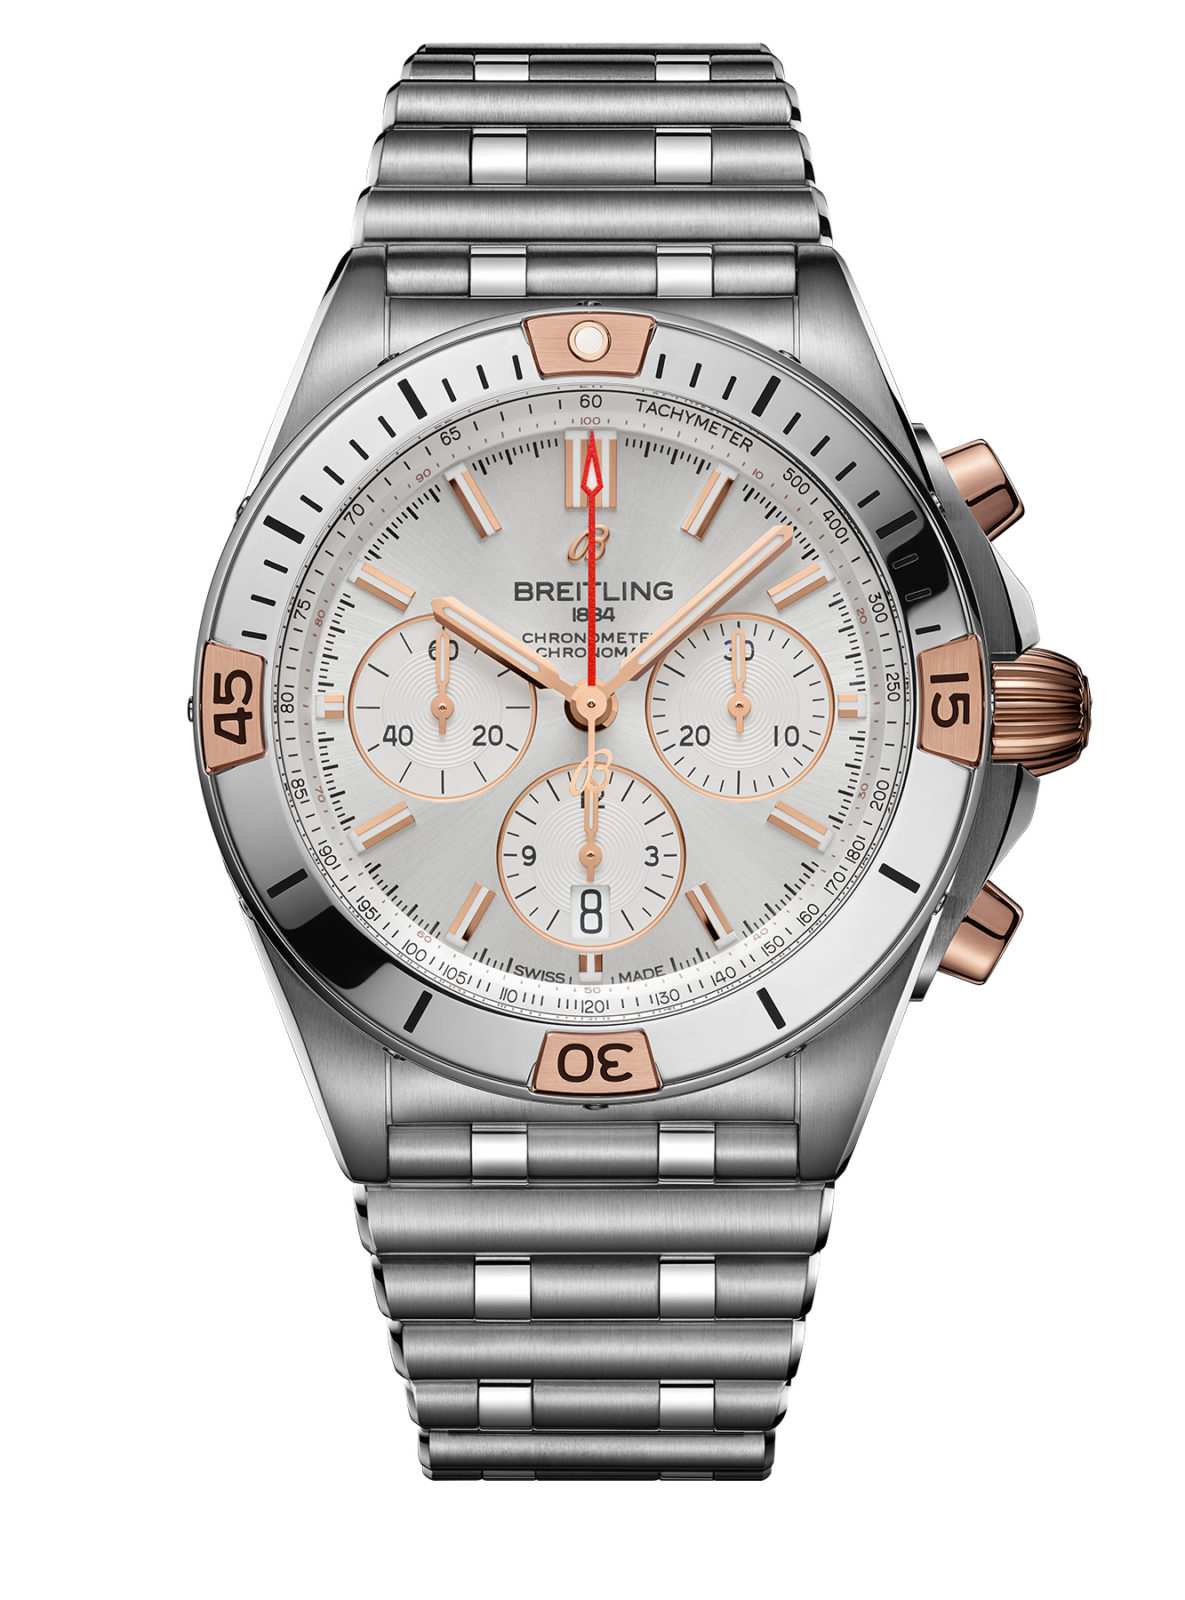 Nouvelle collection Breitling Chronomat - Breitling Chronomat B01 Silver Steel & Gold Rider Tabs